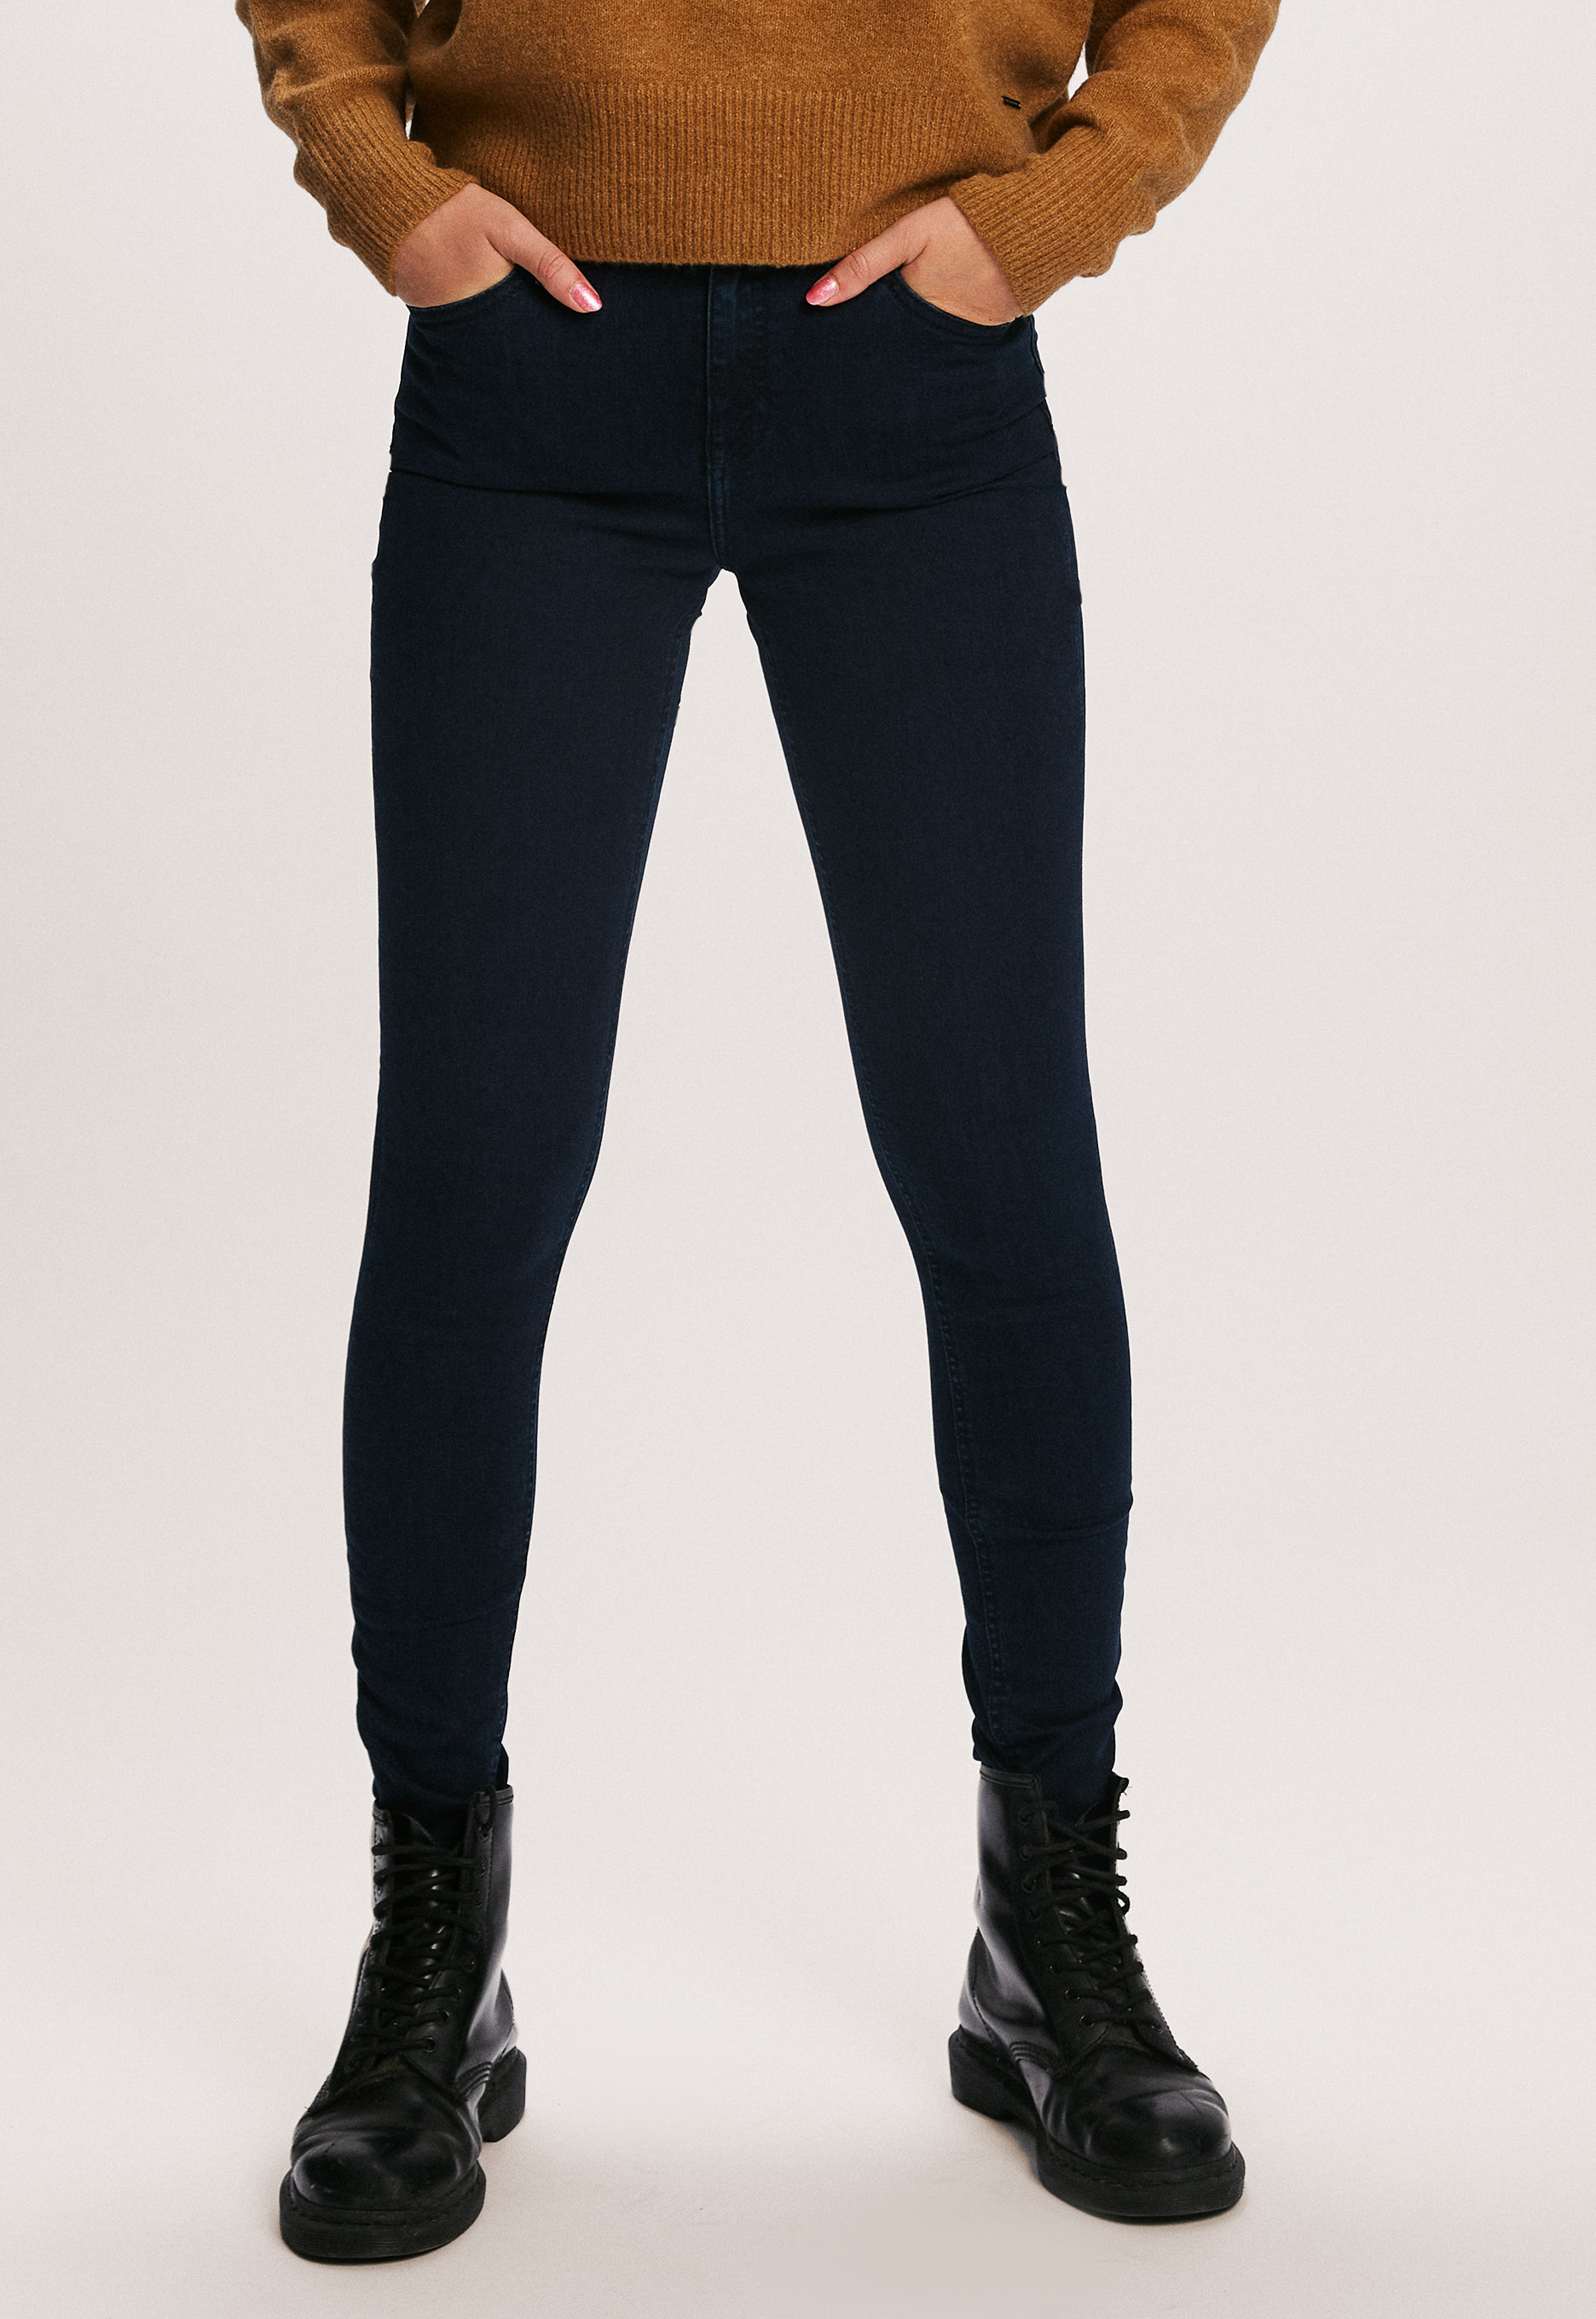 Tommy Jeans Nora Mid Rise Skinny Jeans